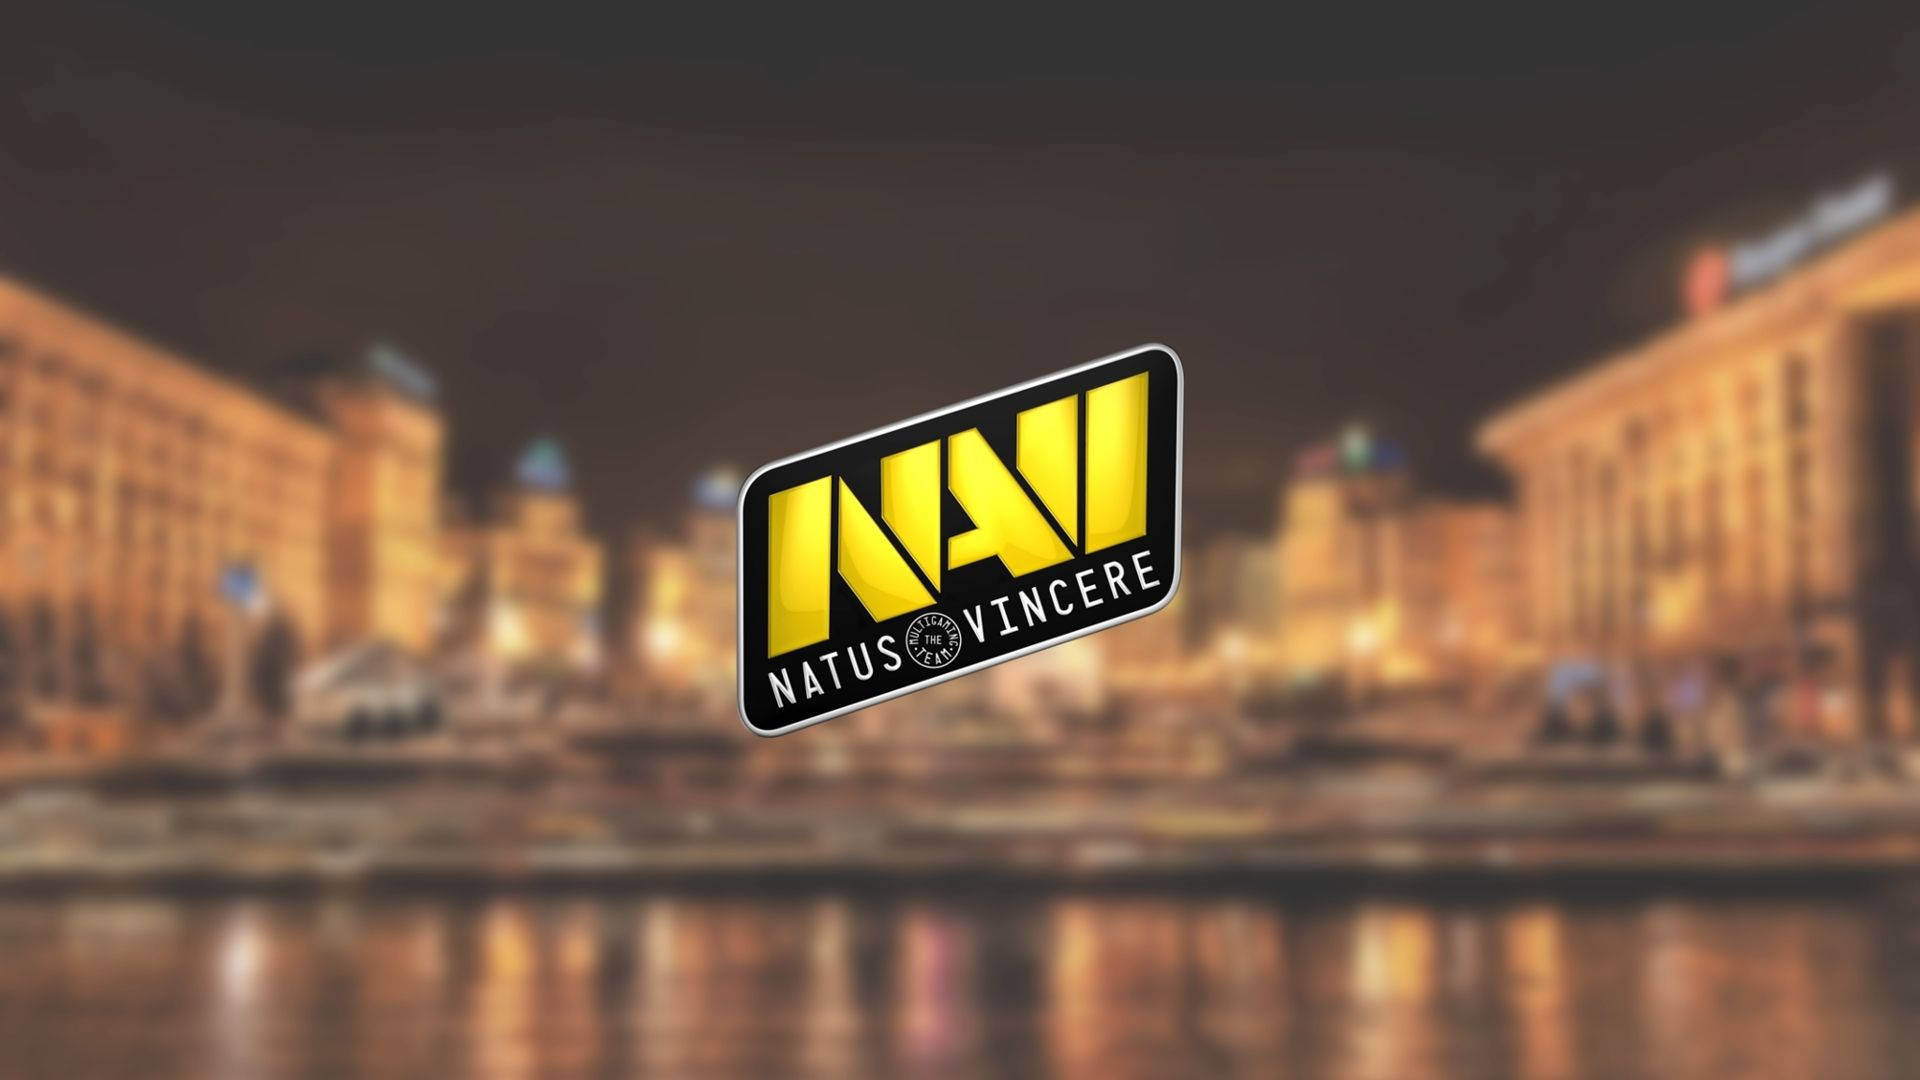 Natus Vincere In City Background